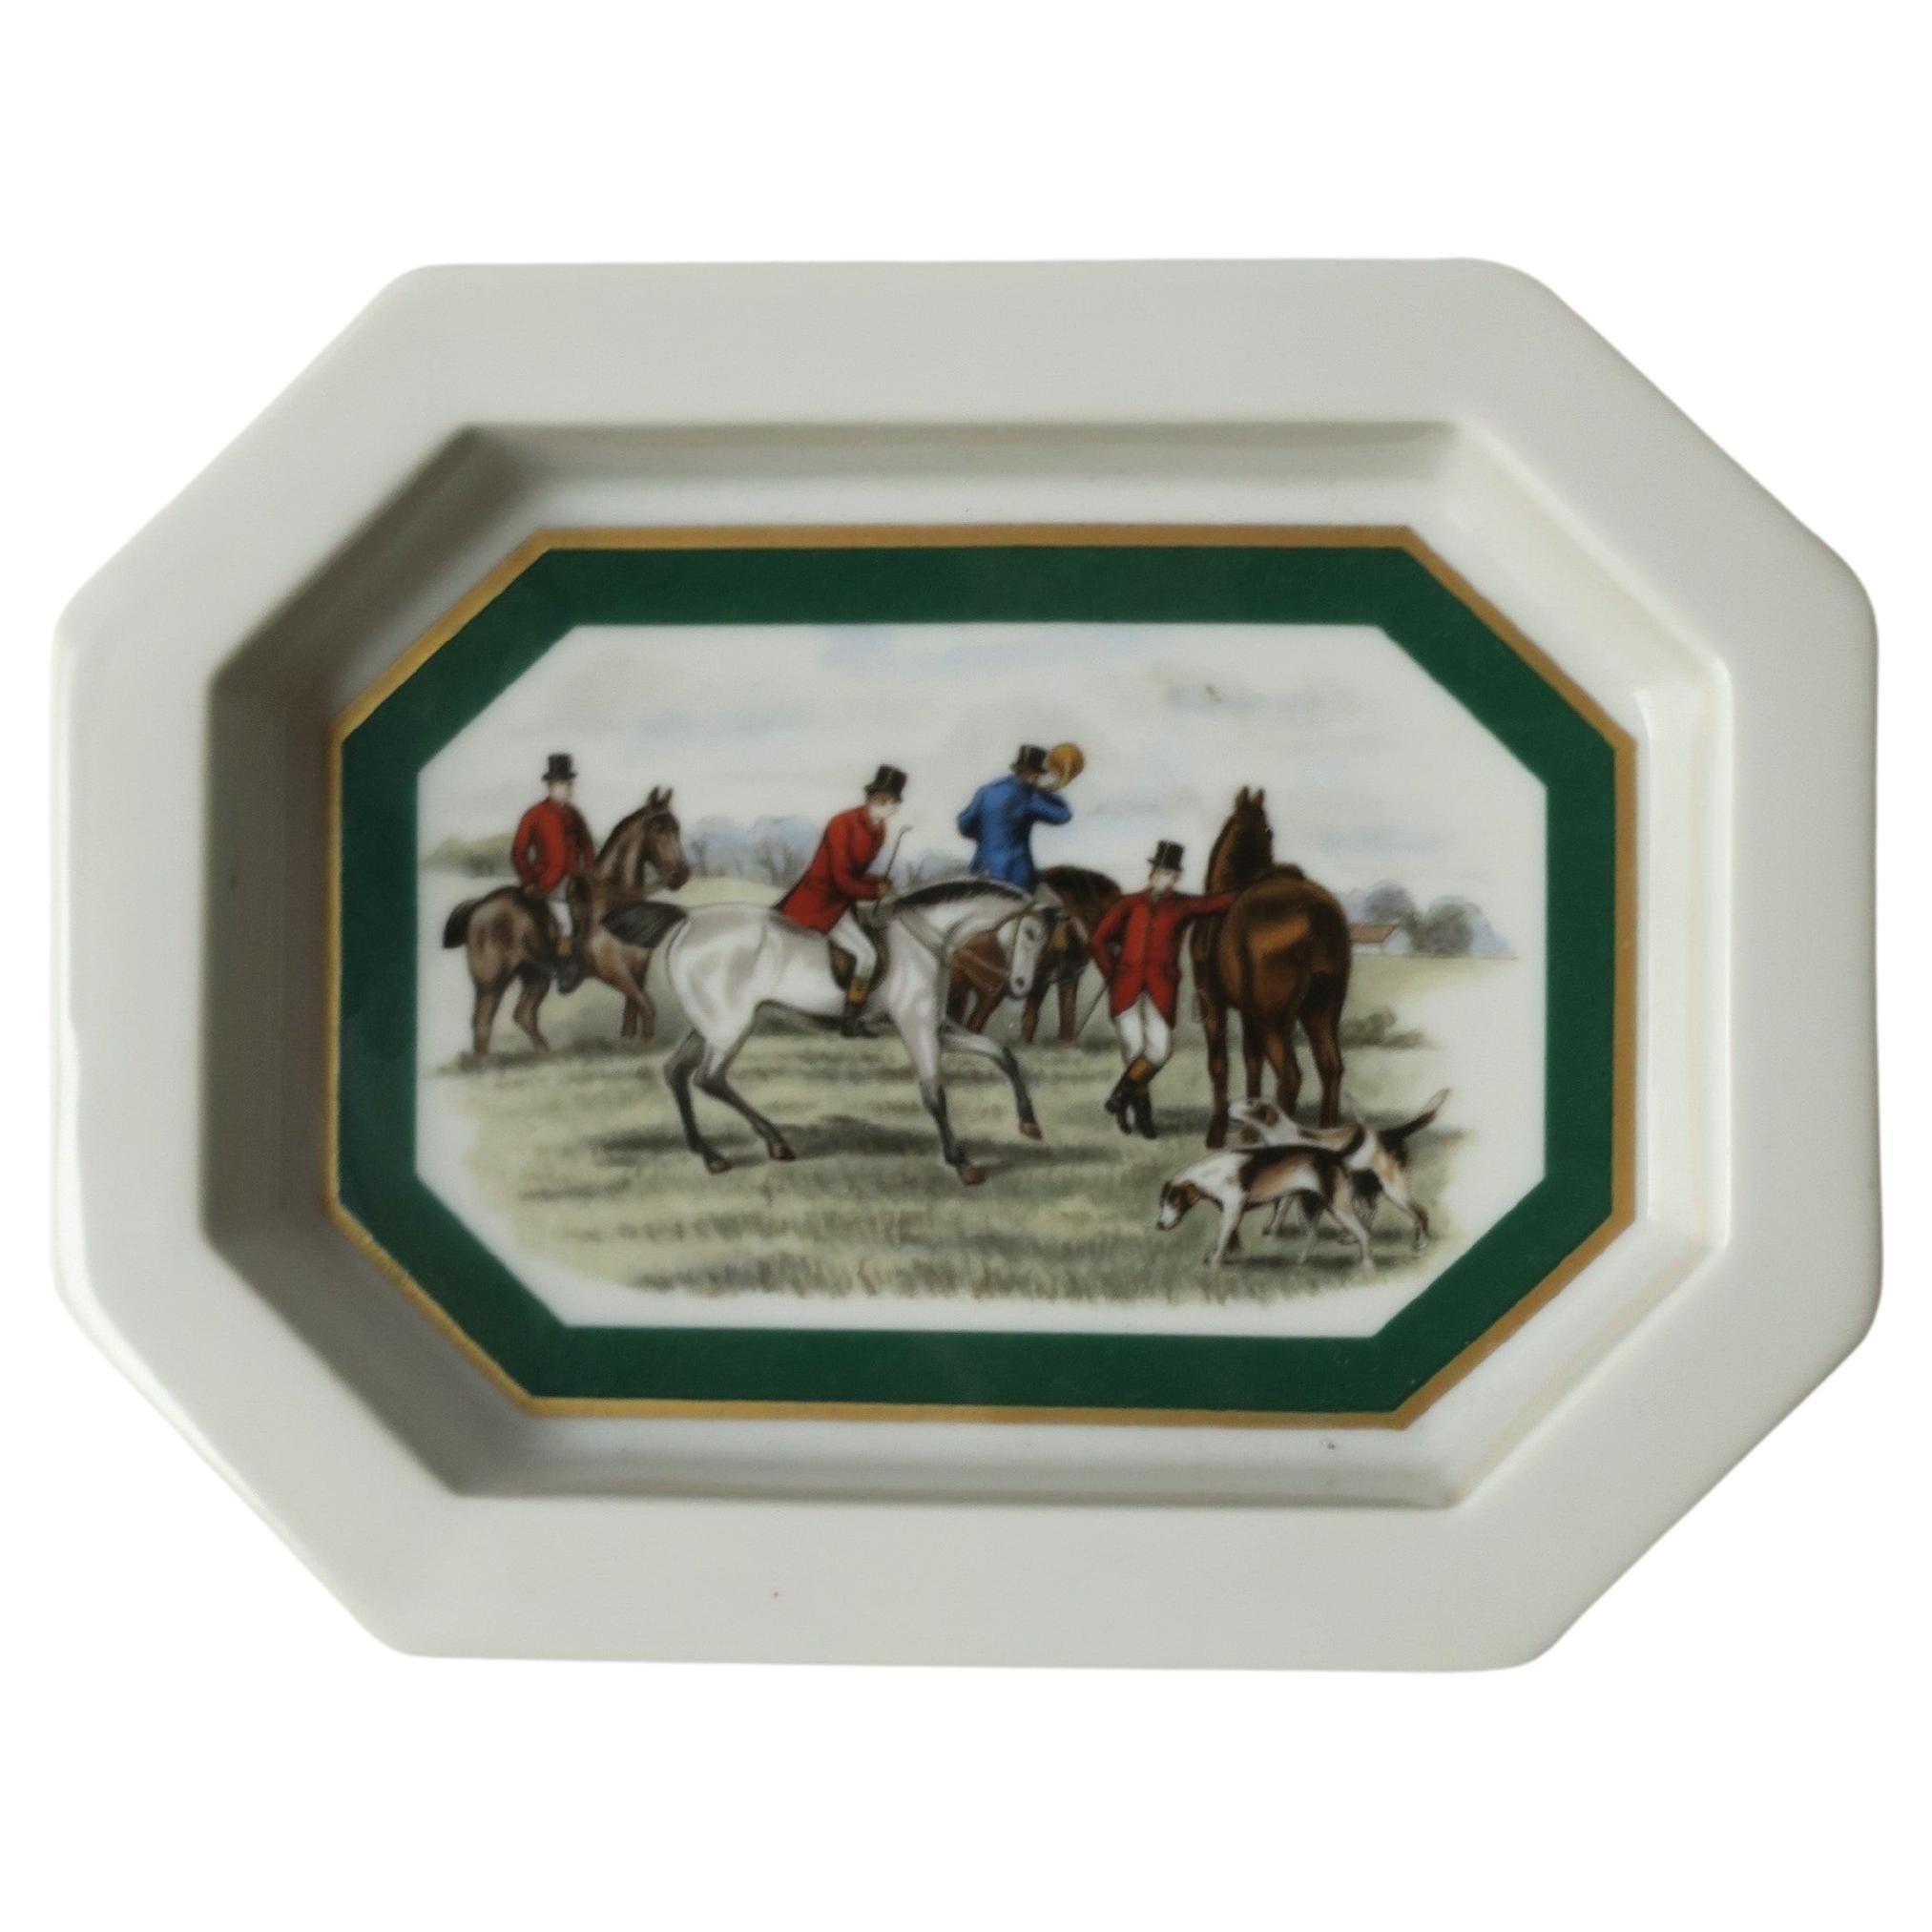 Porcelain Jewelry Dish with Equestrian Horse Scene For Sale